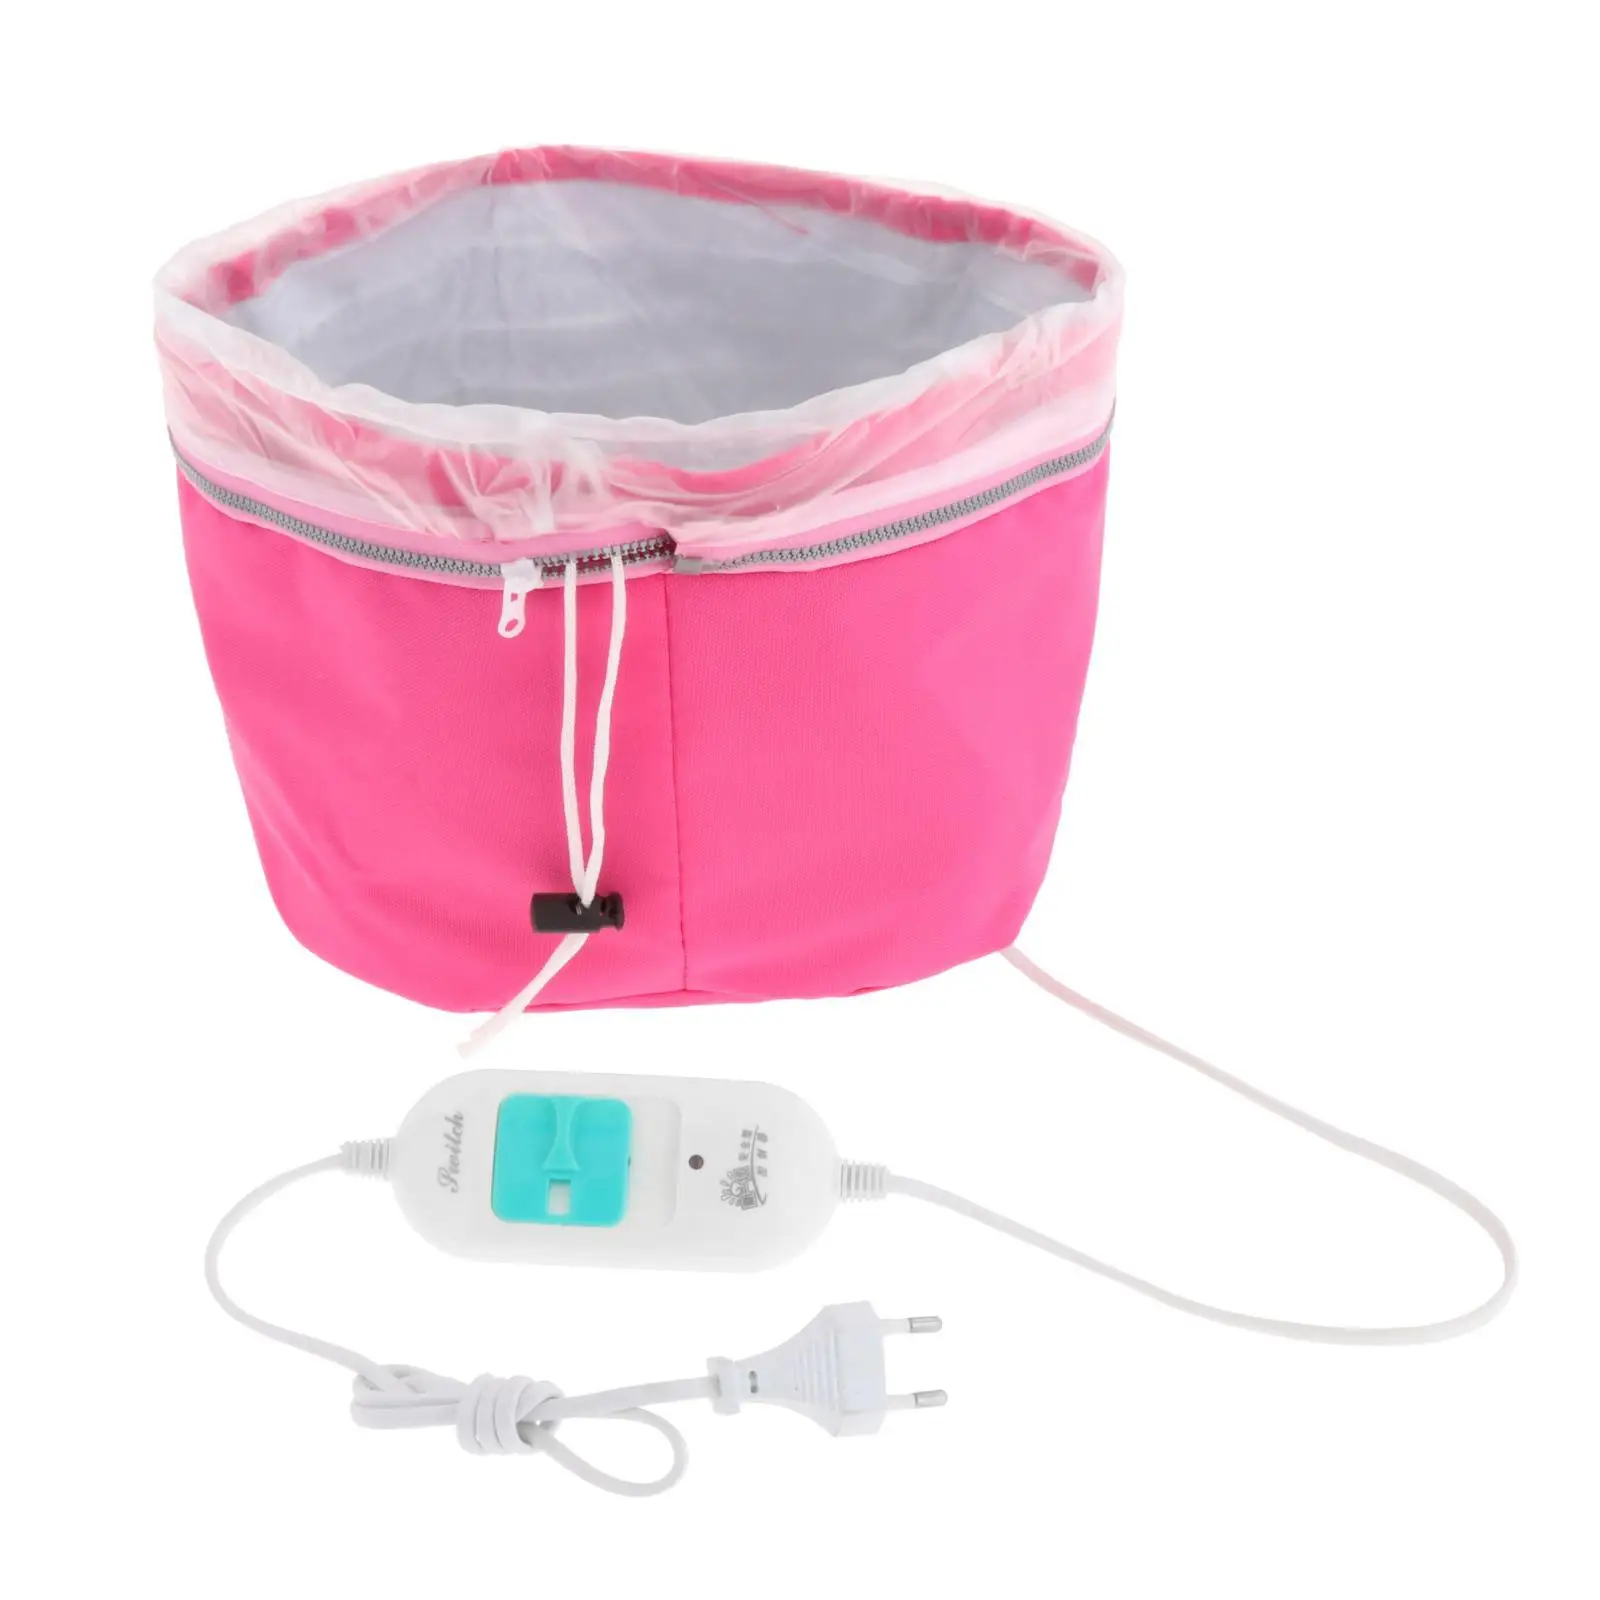 Electric Hair s 220V Portable Scalp Treatment for Home Use Heating s Baking Oil s Intelligent Protection